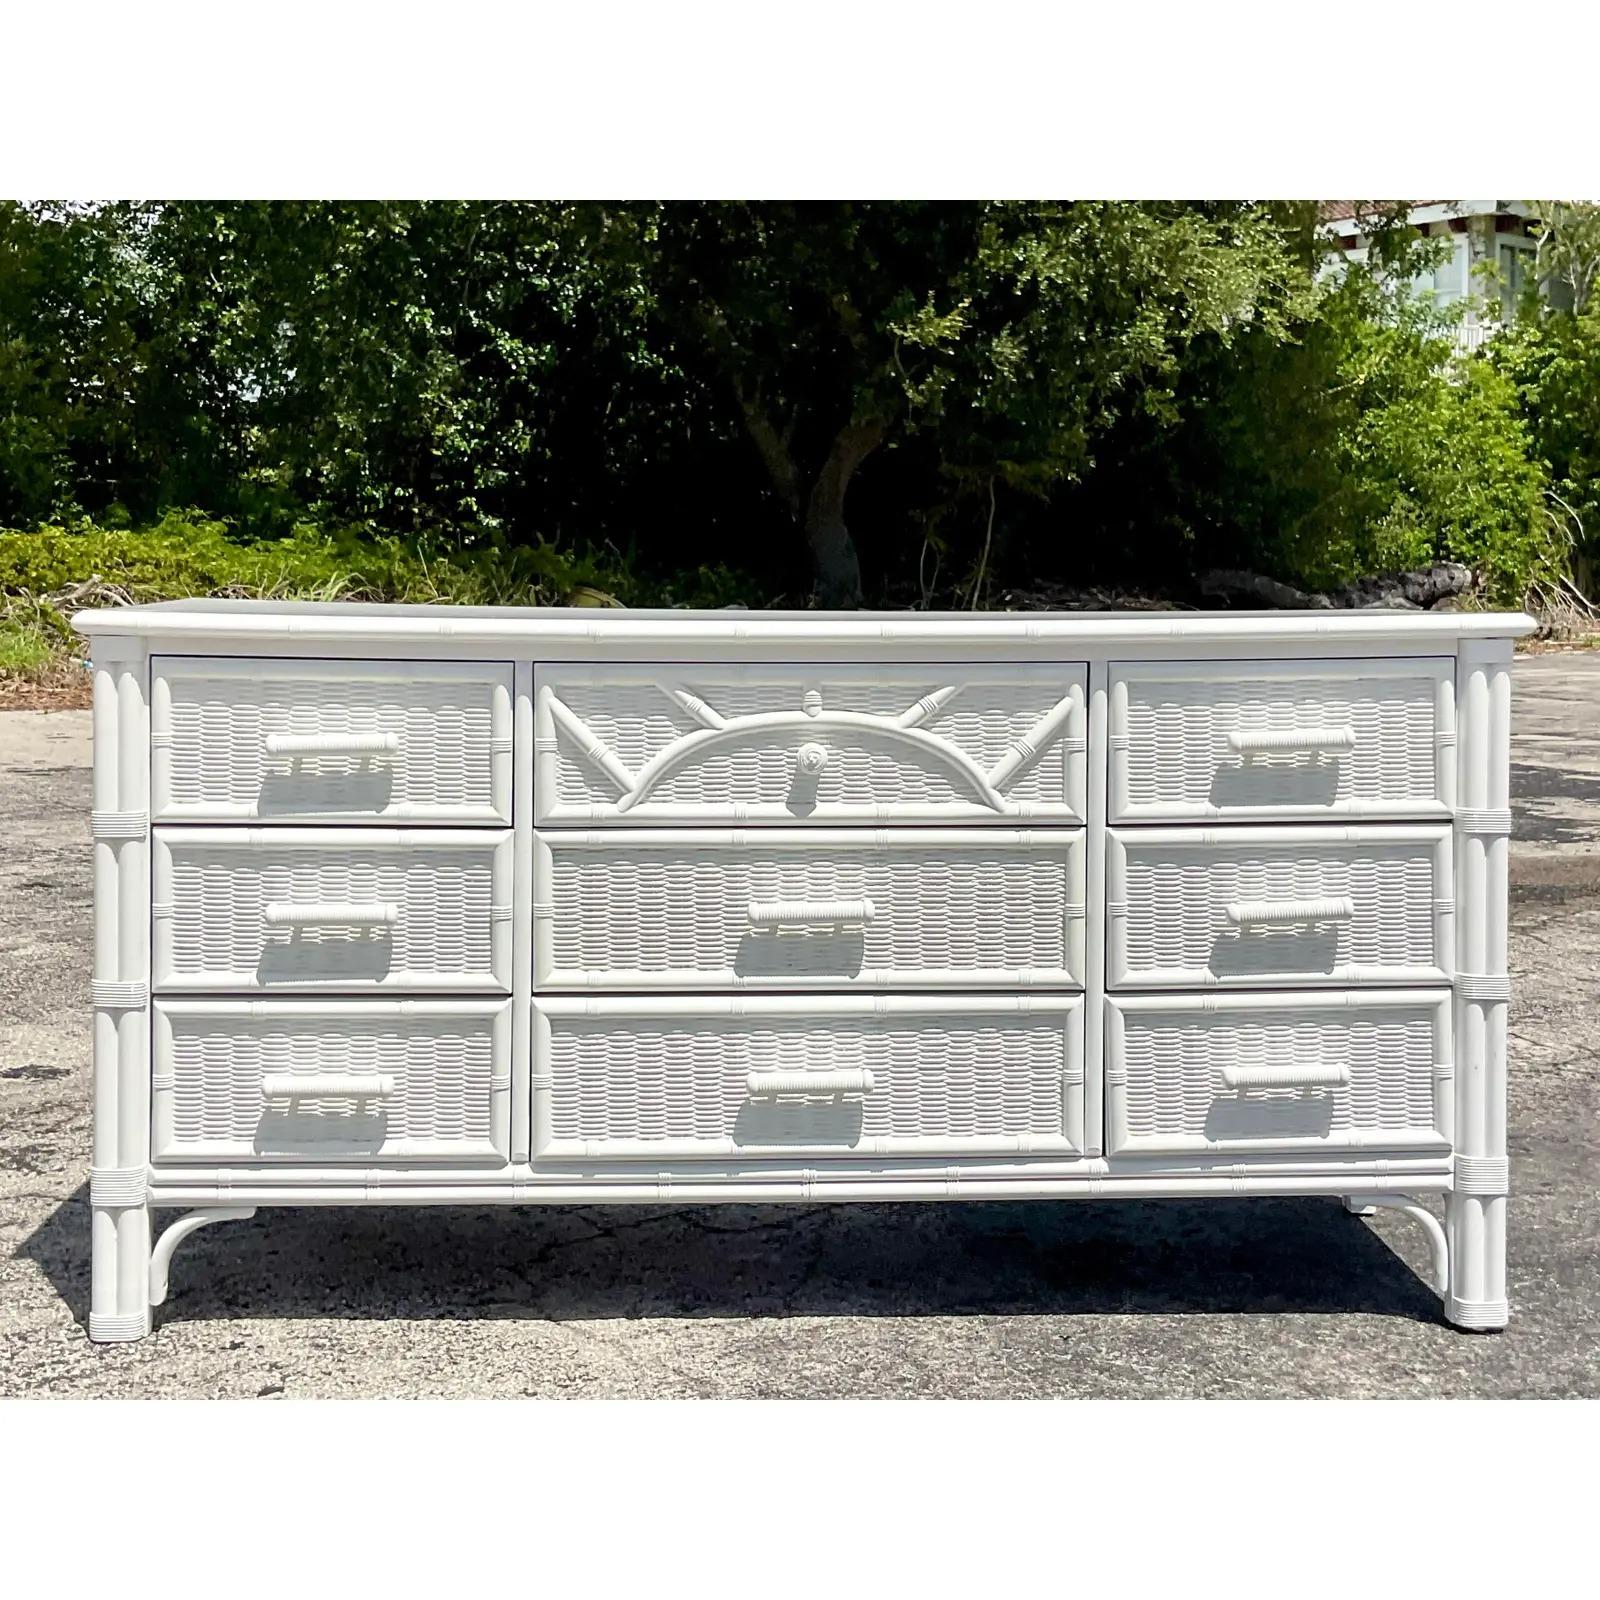 Fantastic vintage Coastal dresser. Made by the iconic Henry Link group. Beautiful white lacquered finish over a carved bamboo design. Acquired from a Palm Beach estate.